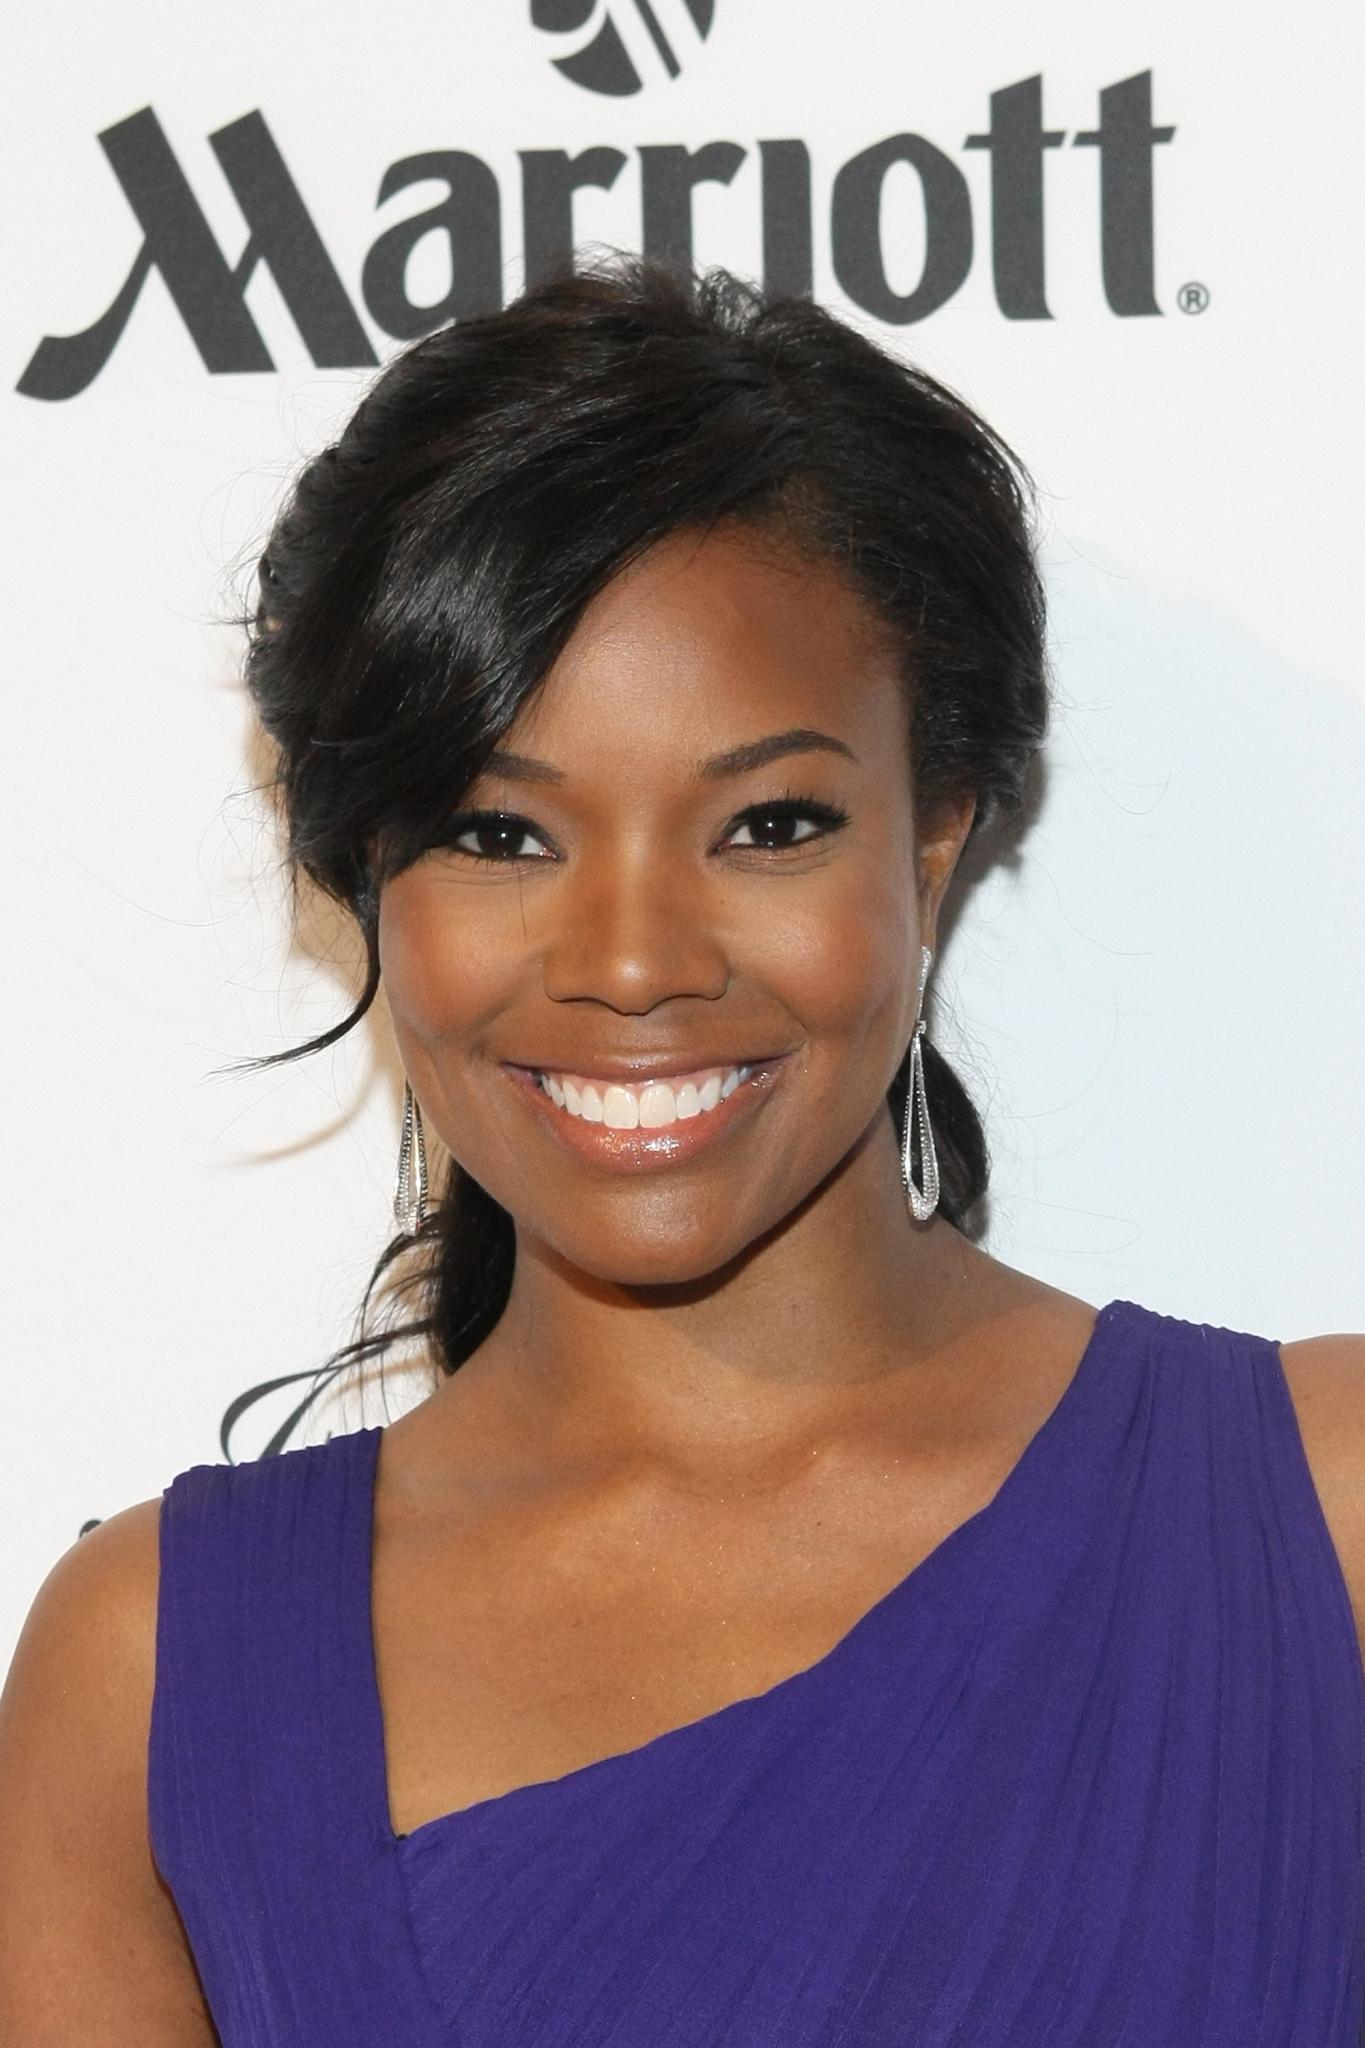 Relive Our Google+ Hangout with Gabrielle Union Now!